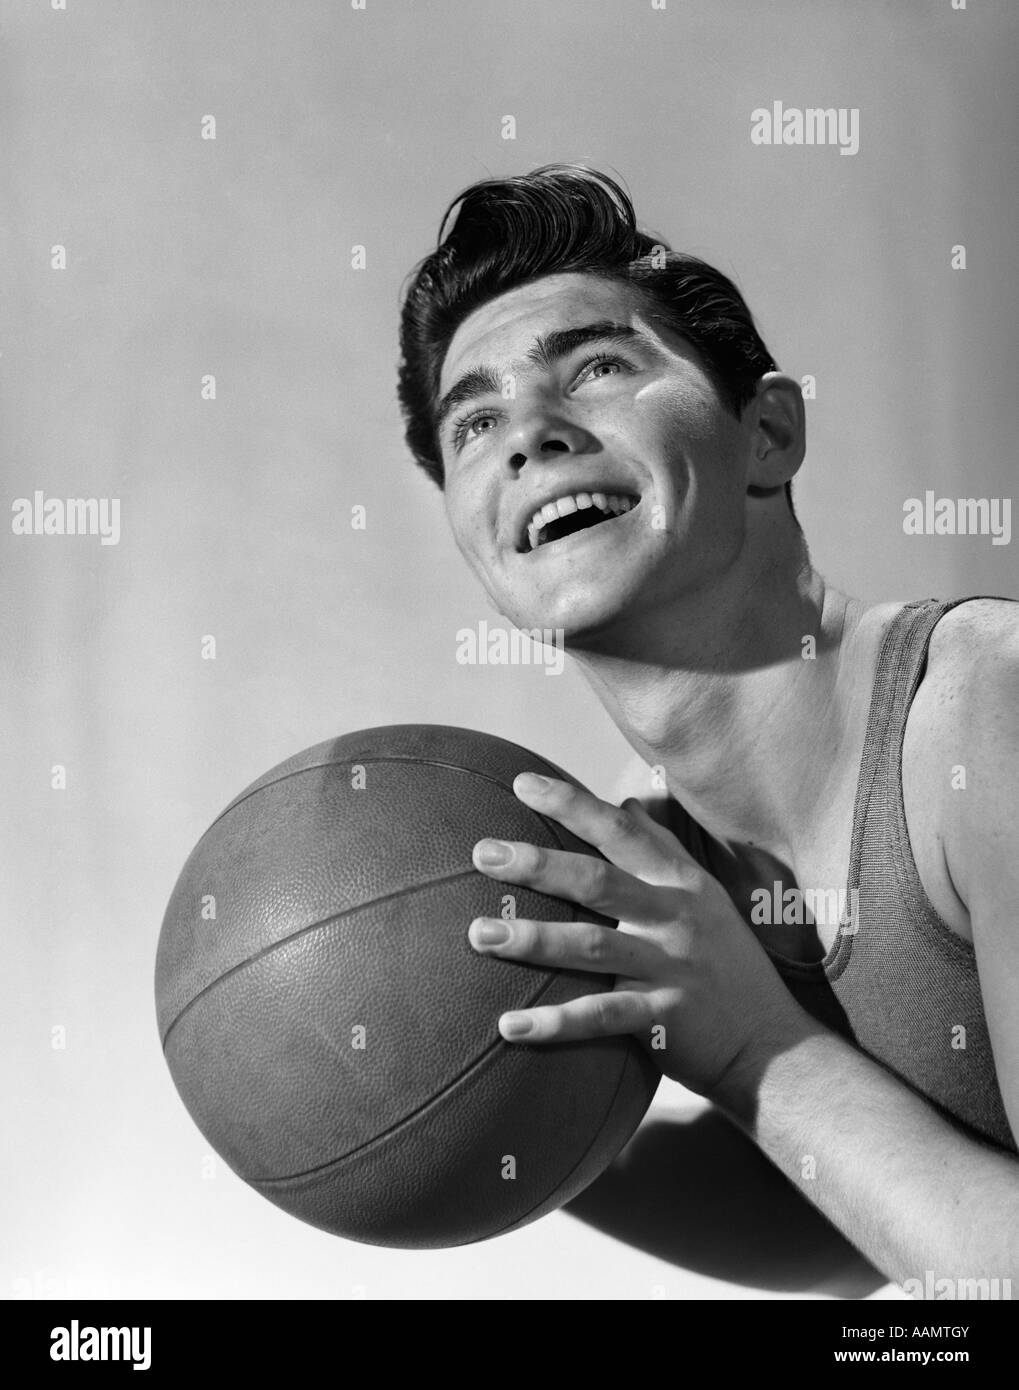 1950s PORTRAIT TEEN BOY MAN SMILING LOOKING UP HOLDING BASKETBALL PLAYER Stock Photo